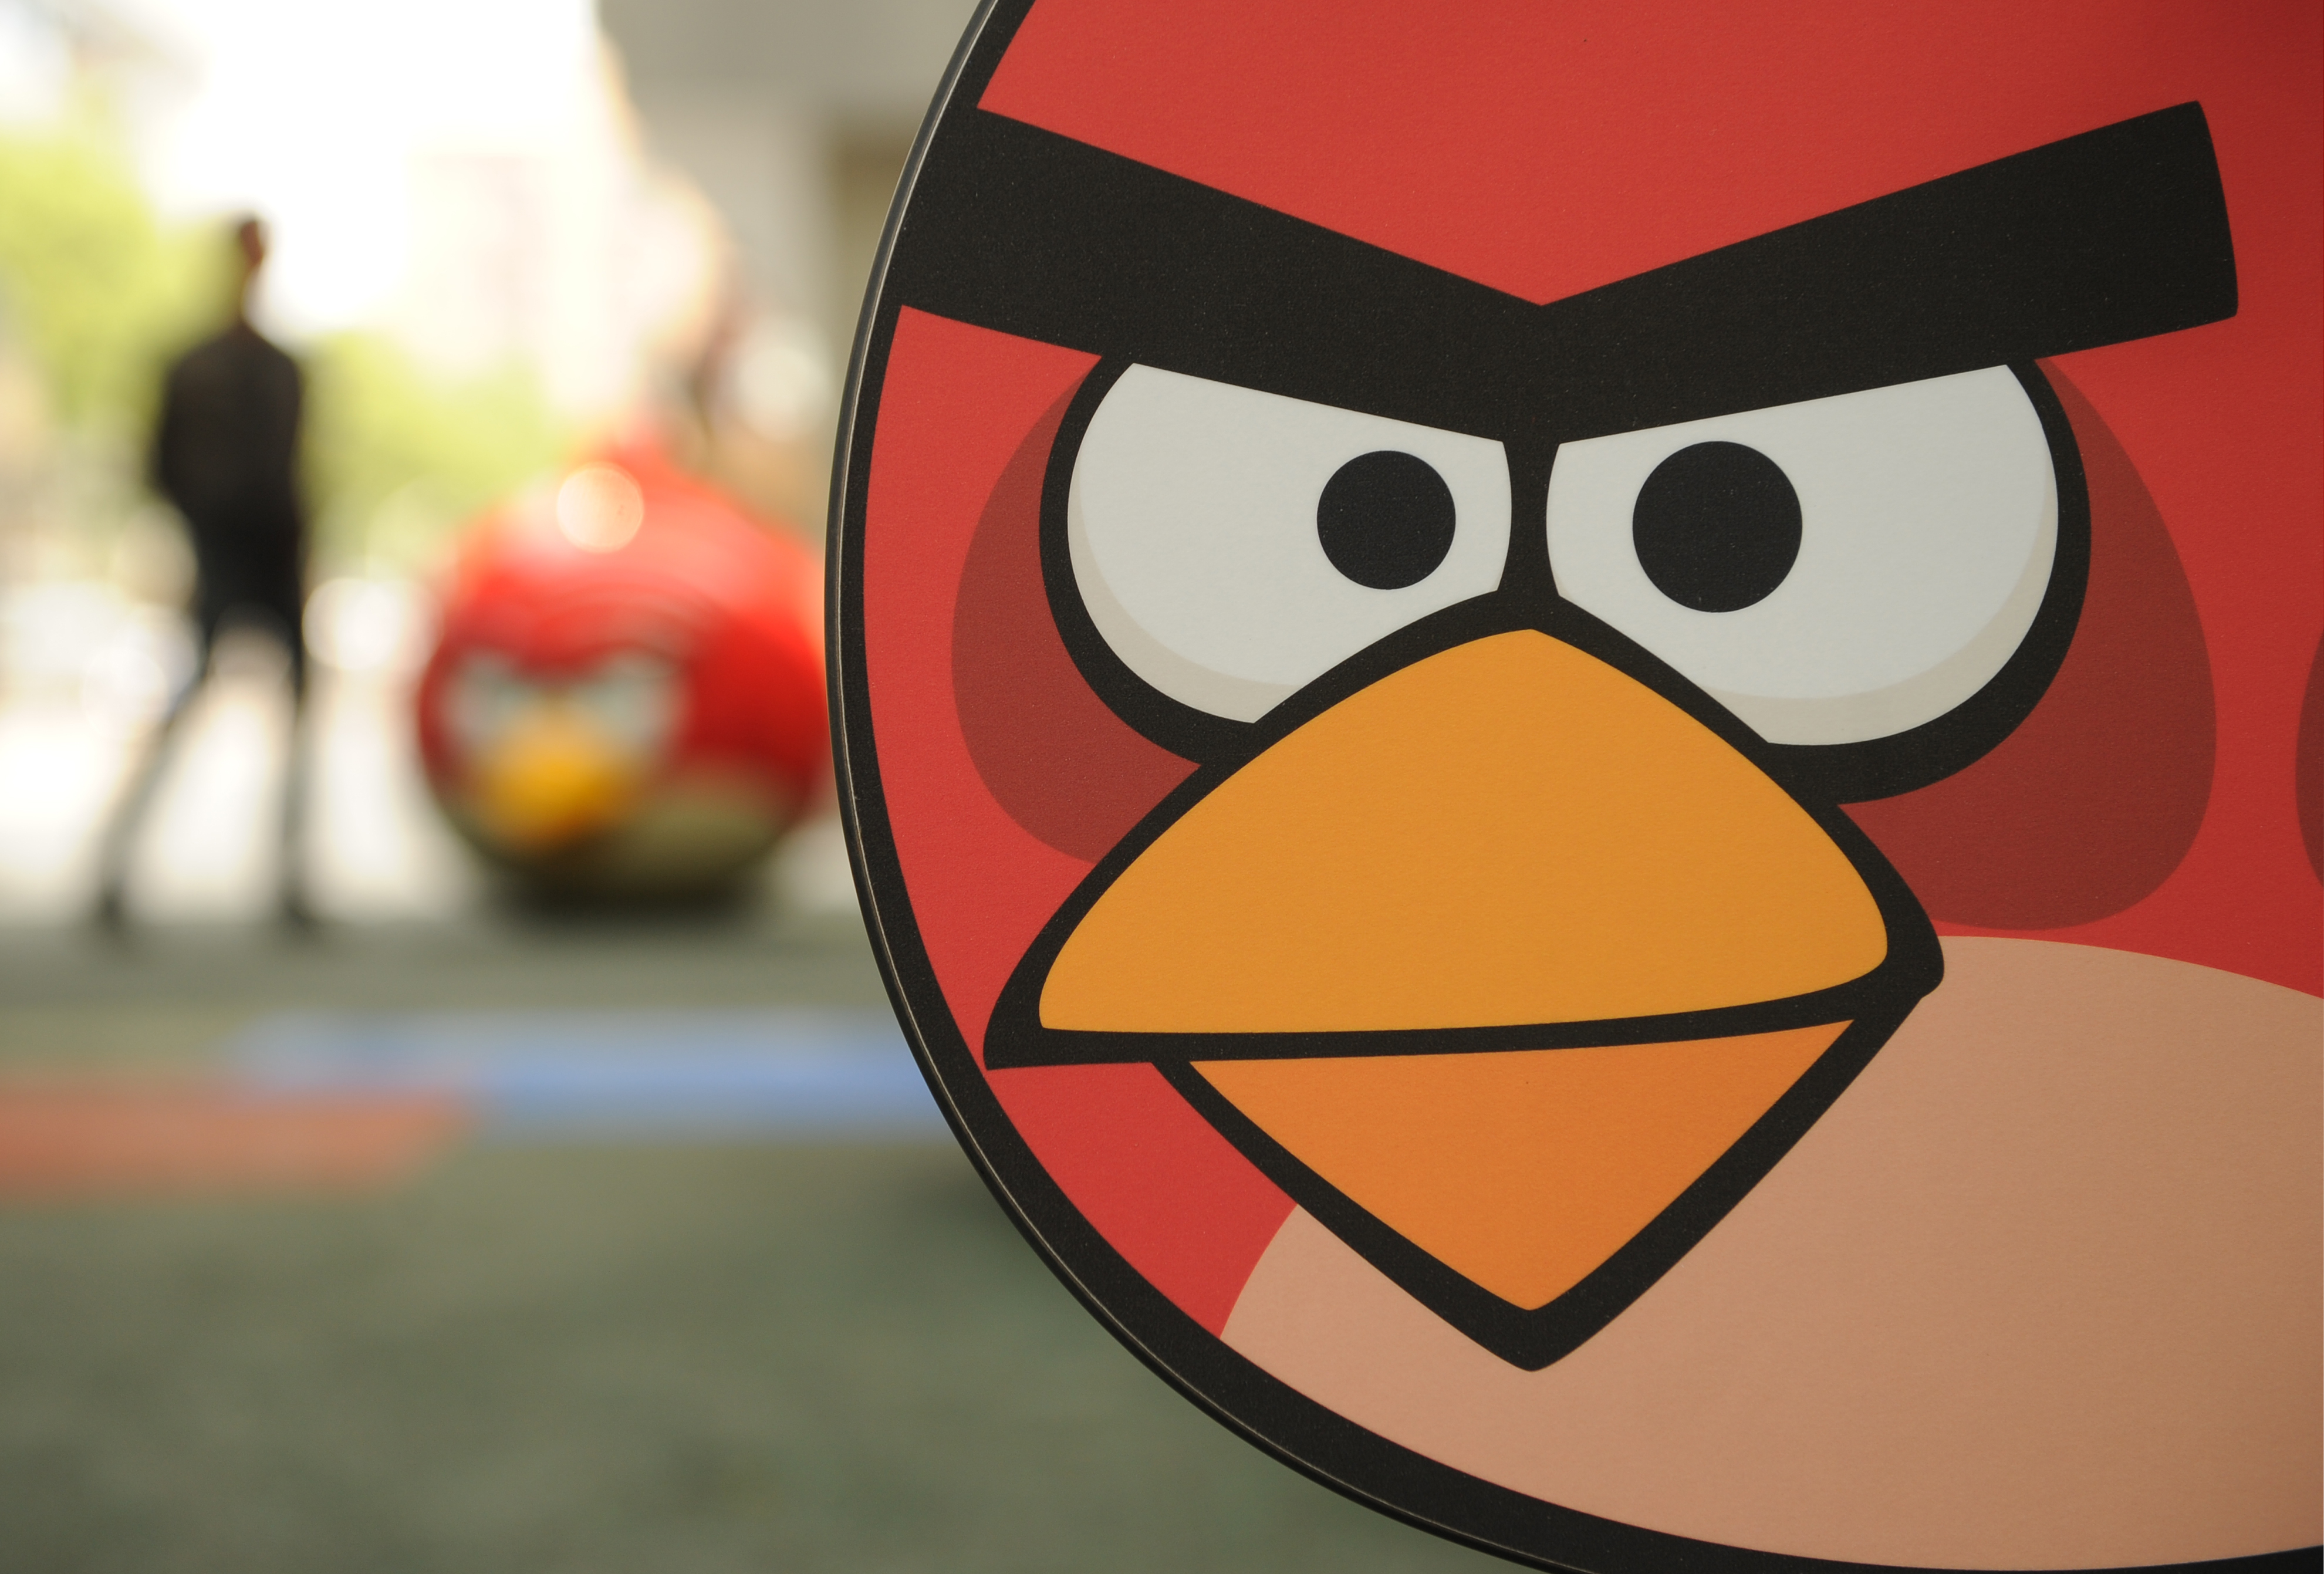 foto angry birds toons